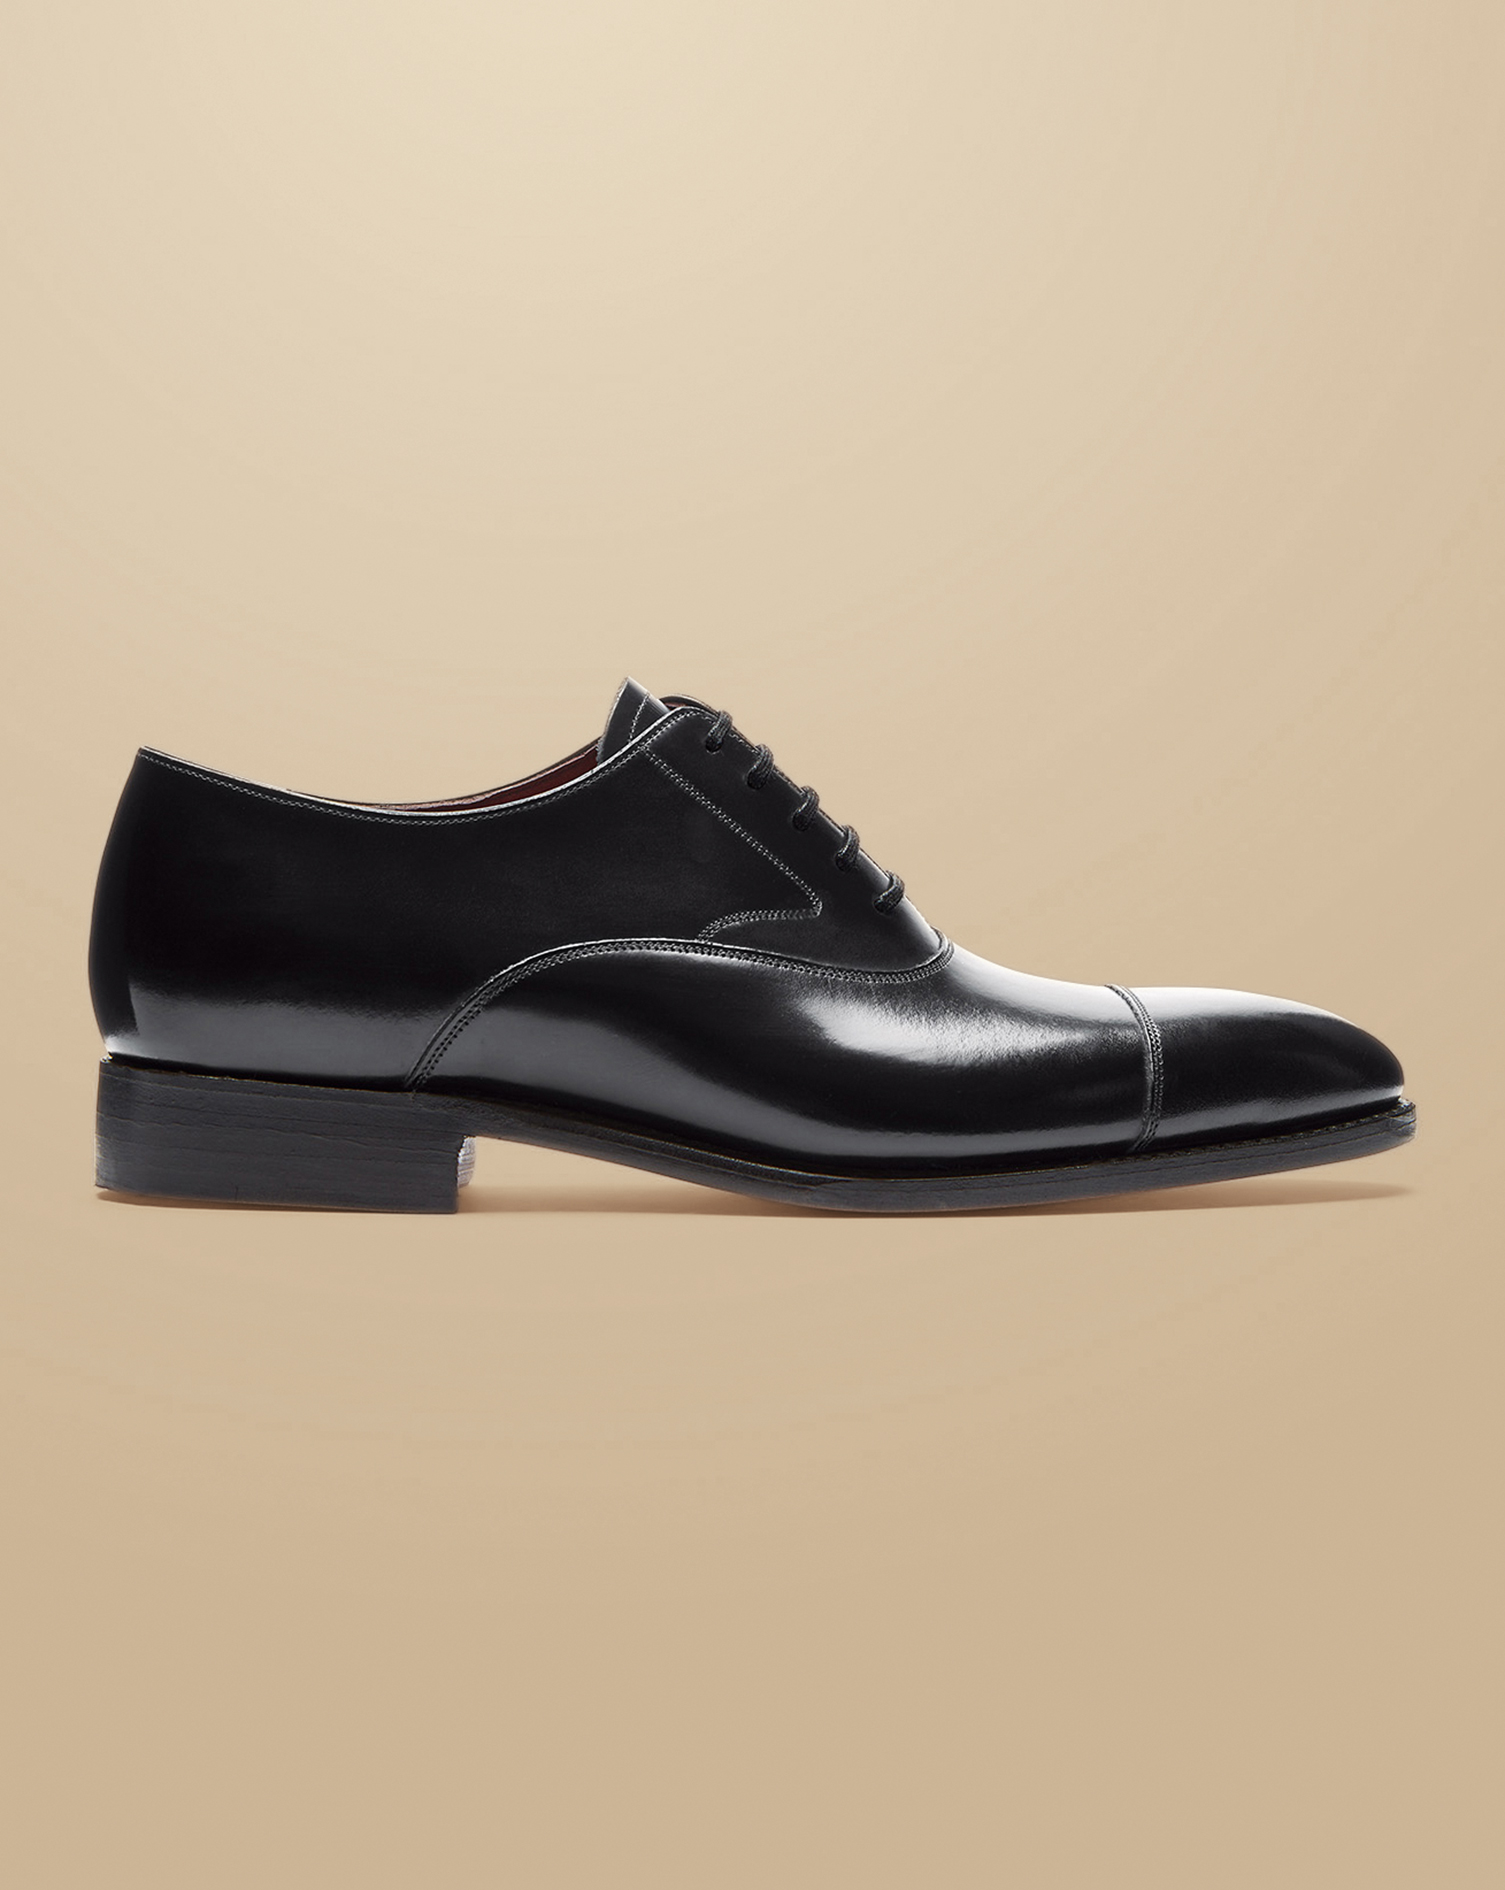 Men's Charles Tyrwhitt Made In England High-Shine Oxford Shoes - Black Size 11 Leather
